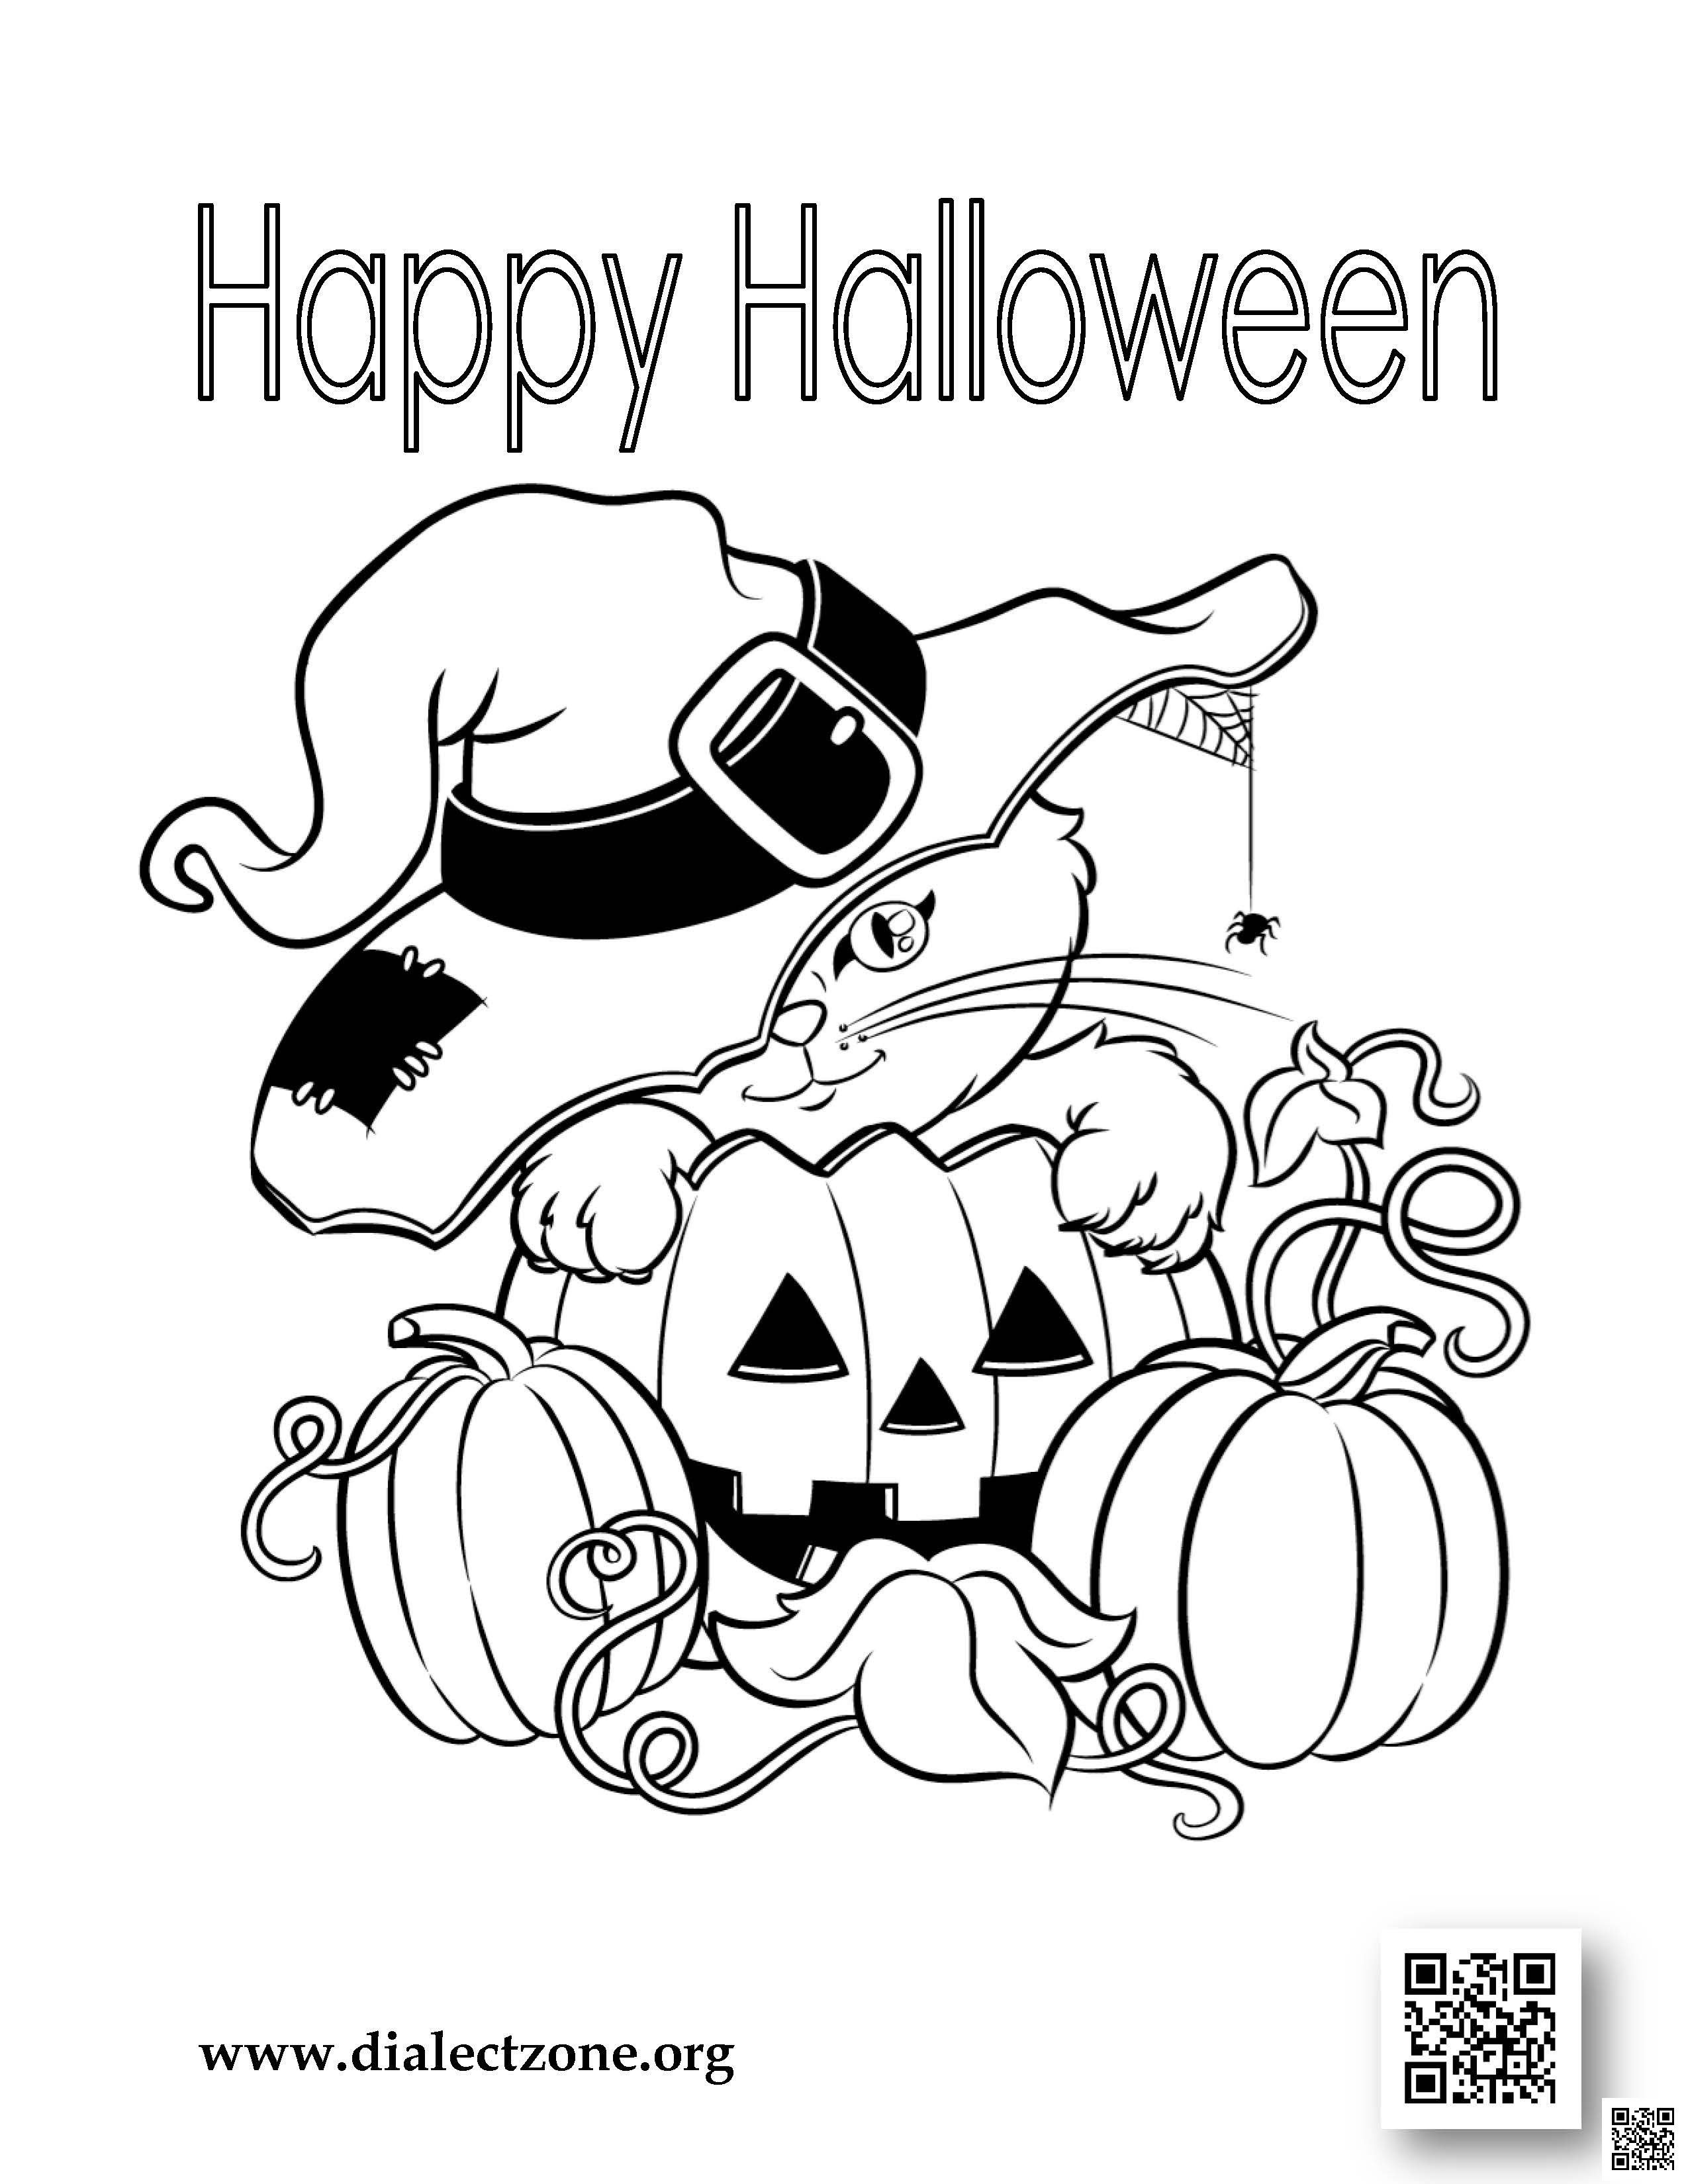 Halloween 2016 Coloring Contest | Dialect Zone International